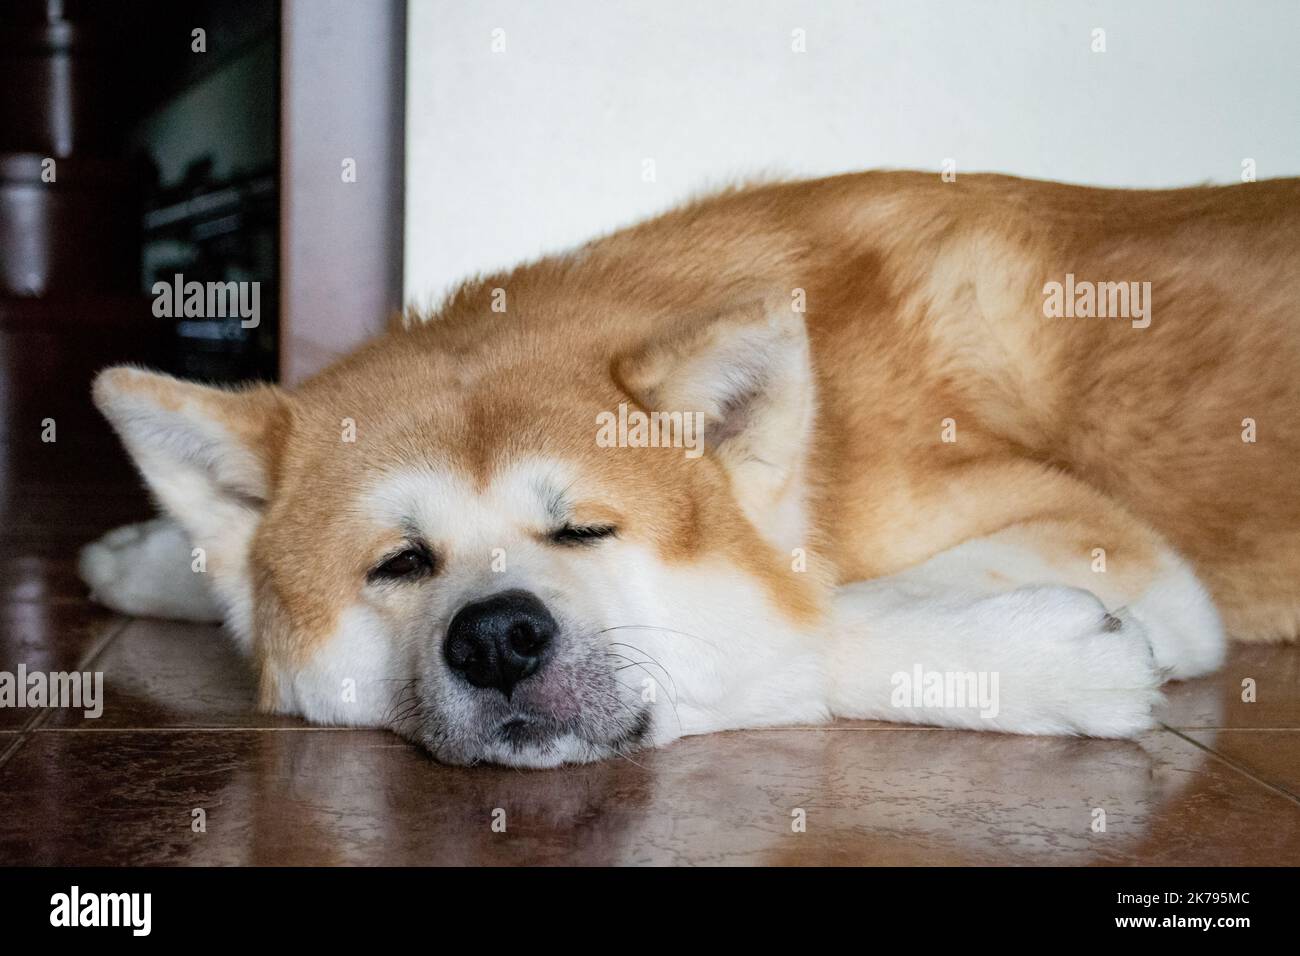 Close-up of the muzzle of a large dog Akita Inu. The pet lies, looks into distance with brown eyes. Stock Photo